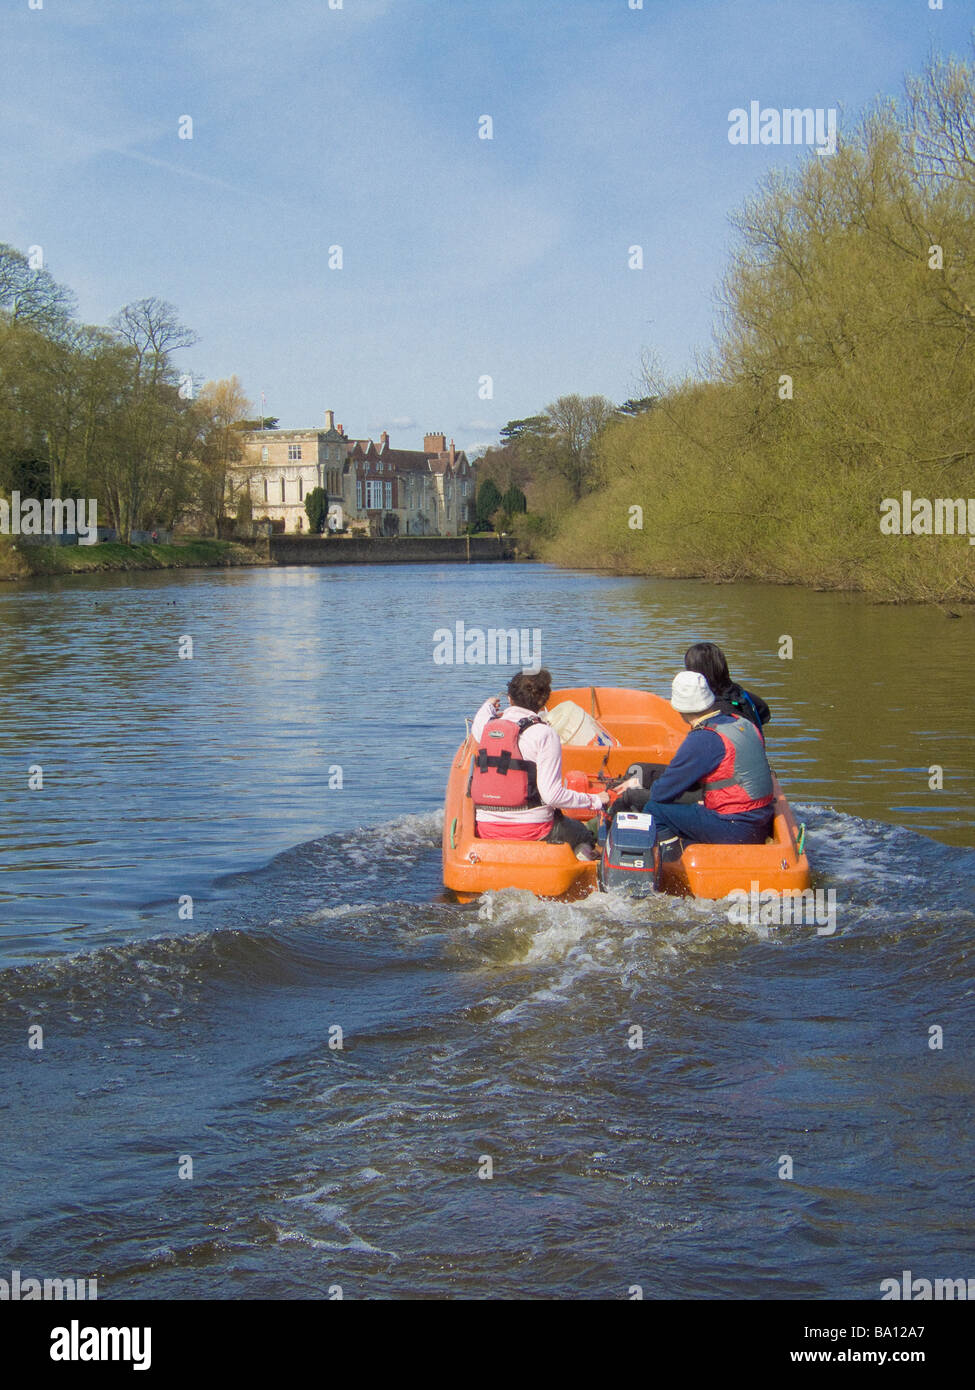 Orange plastic moulded boat with 3 people on board, on the river Ouse in York with Bishopthorpe Palace in the distance. Stock Photo